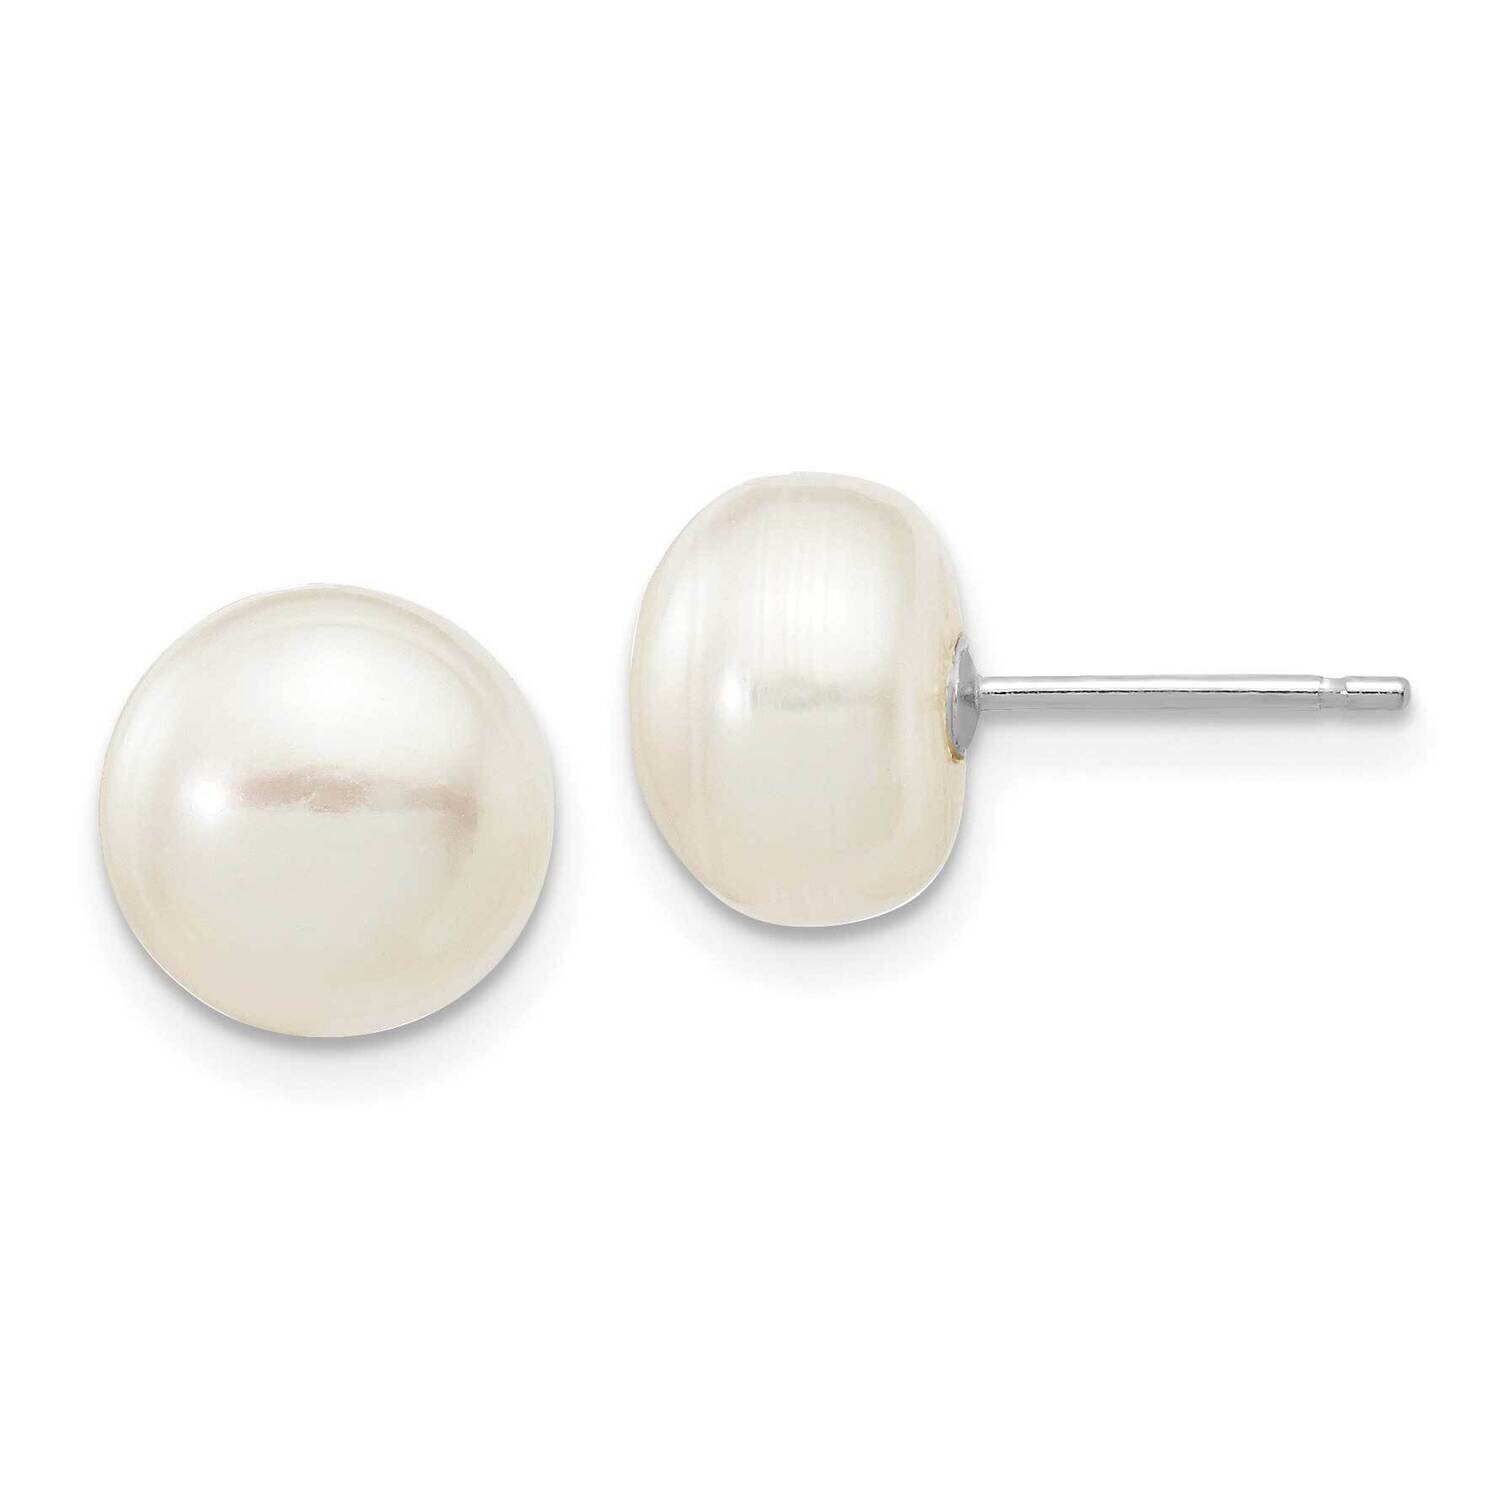 8-9mm White Button Fw Cultured Pearl Stud Post Earrings 10k White Gold 10XW80BW